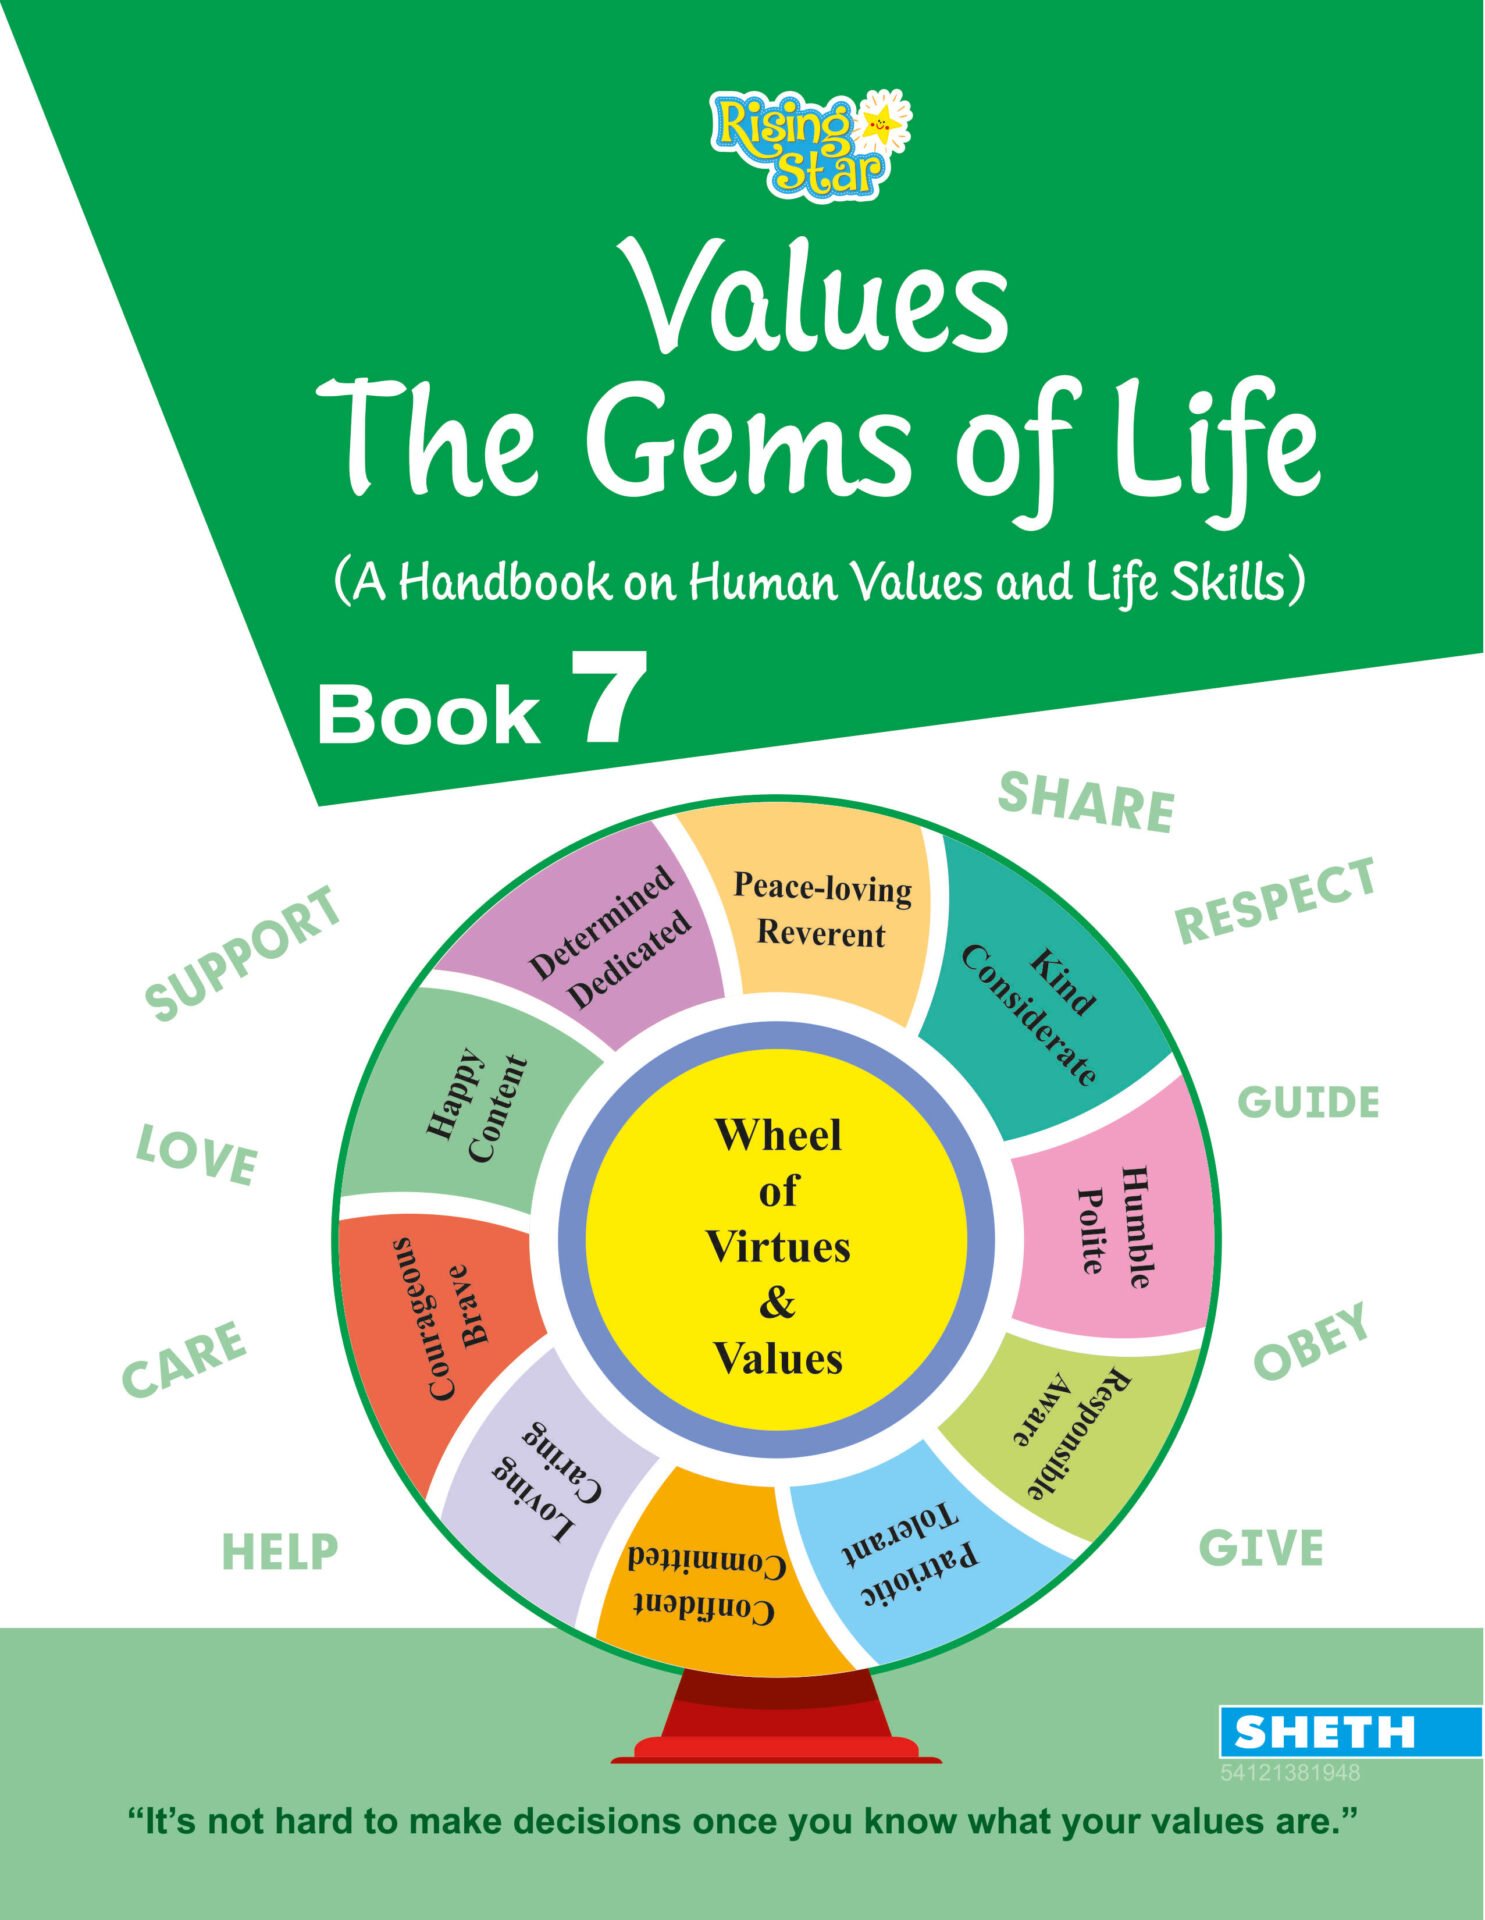 Rising Star Values The Gems of Life Book 7 1 1